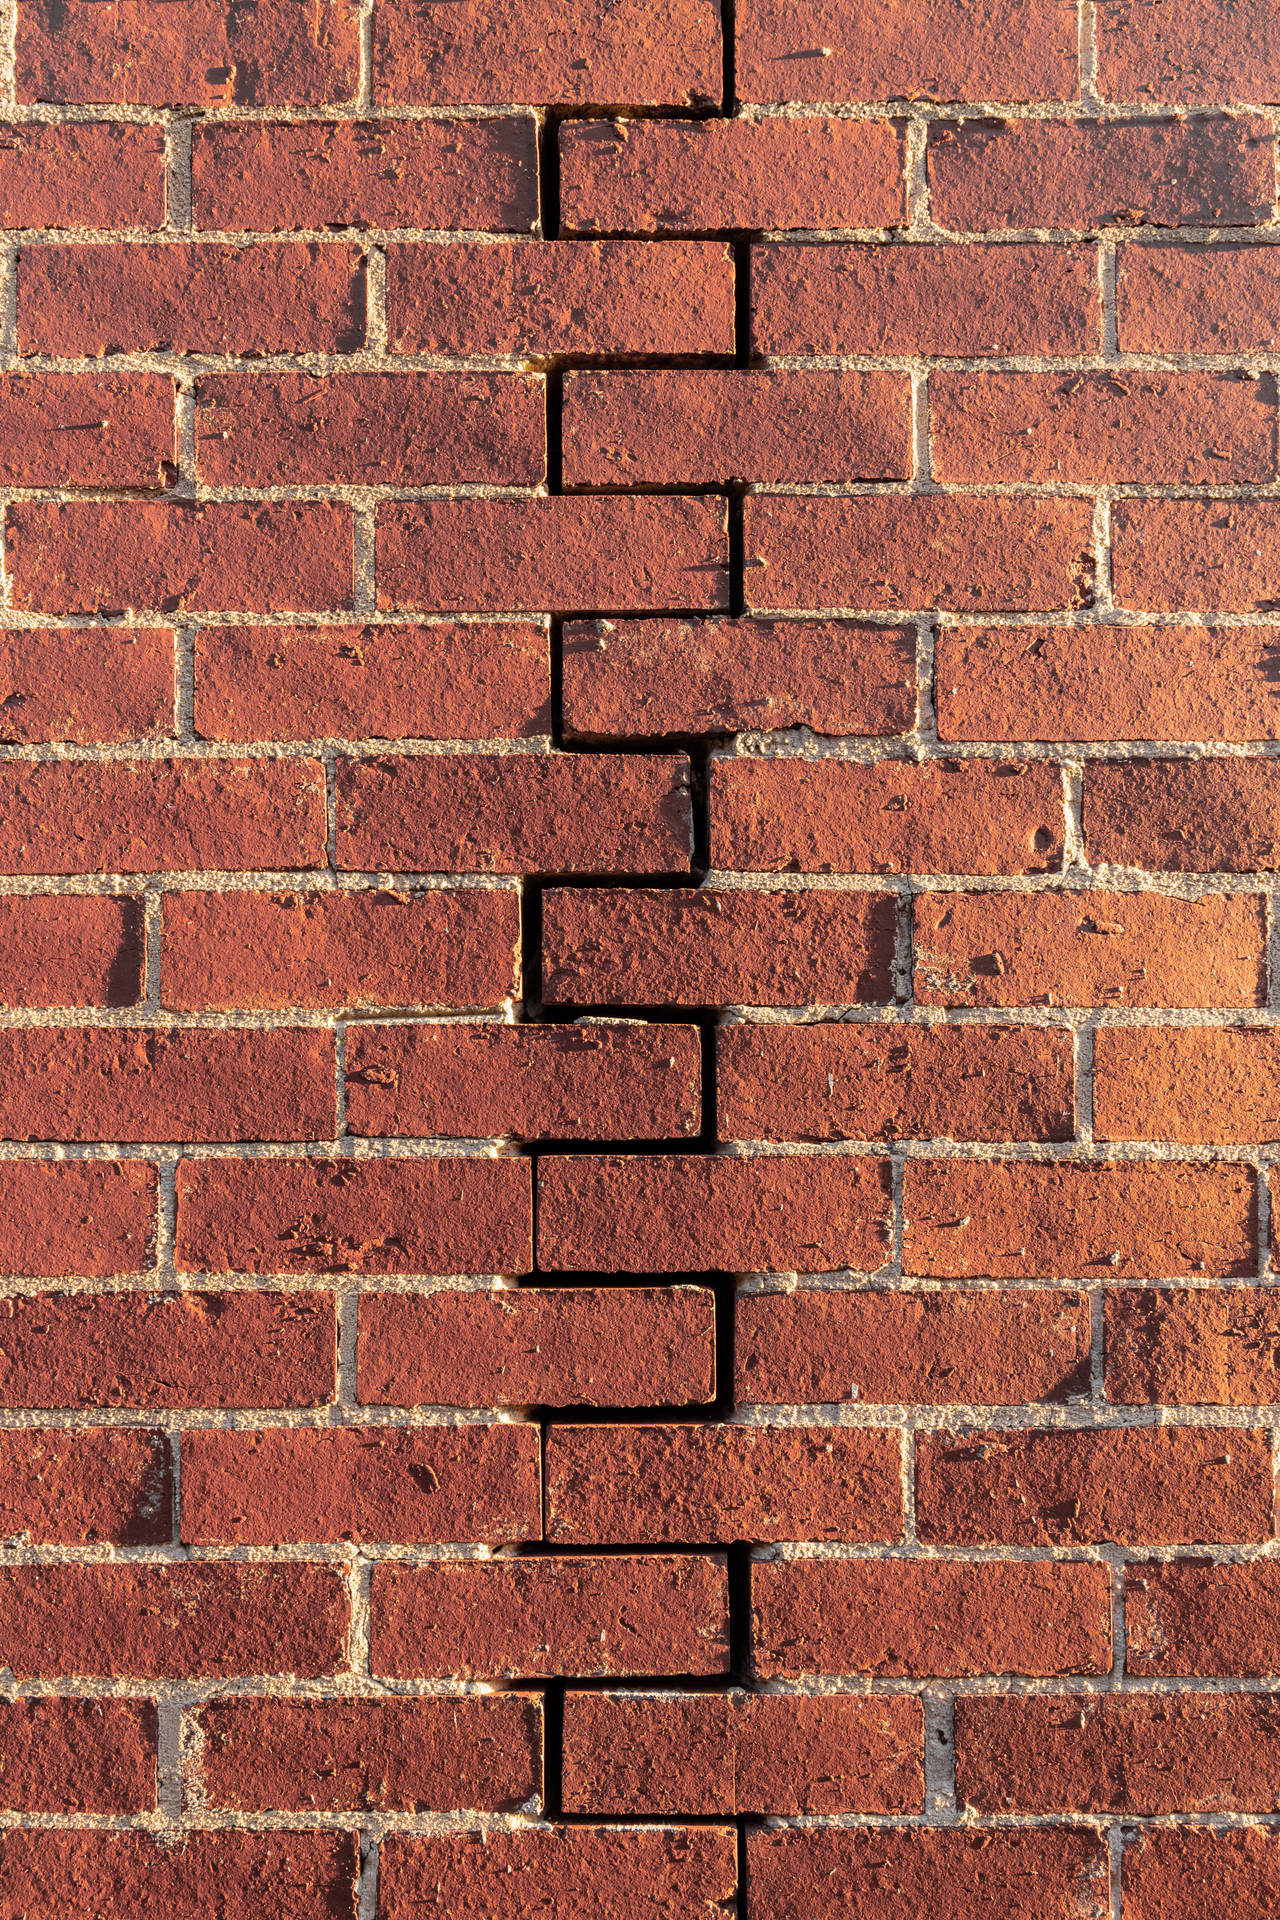 Brick 4160X6240 Wallpaper and Background Image